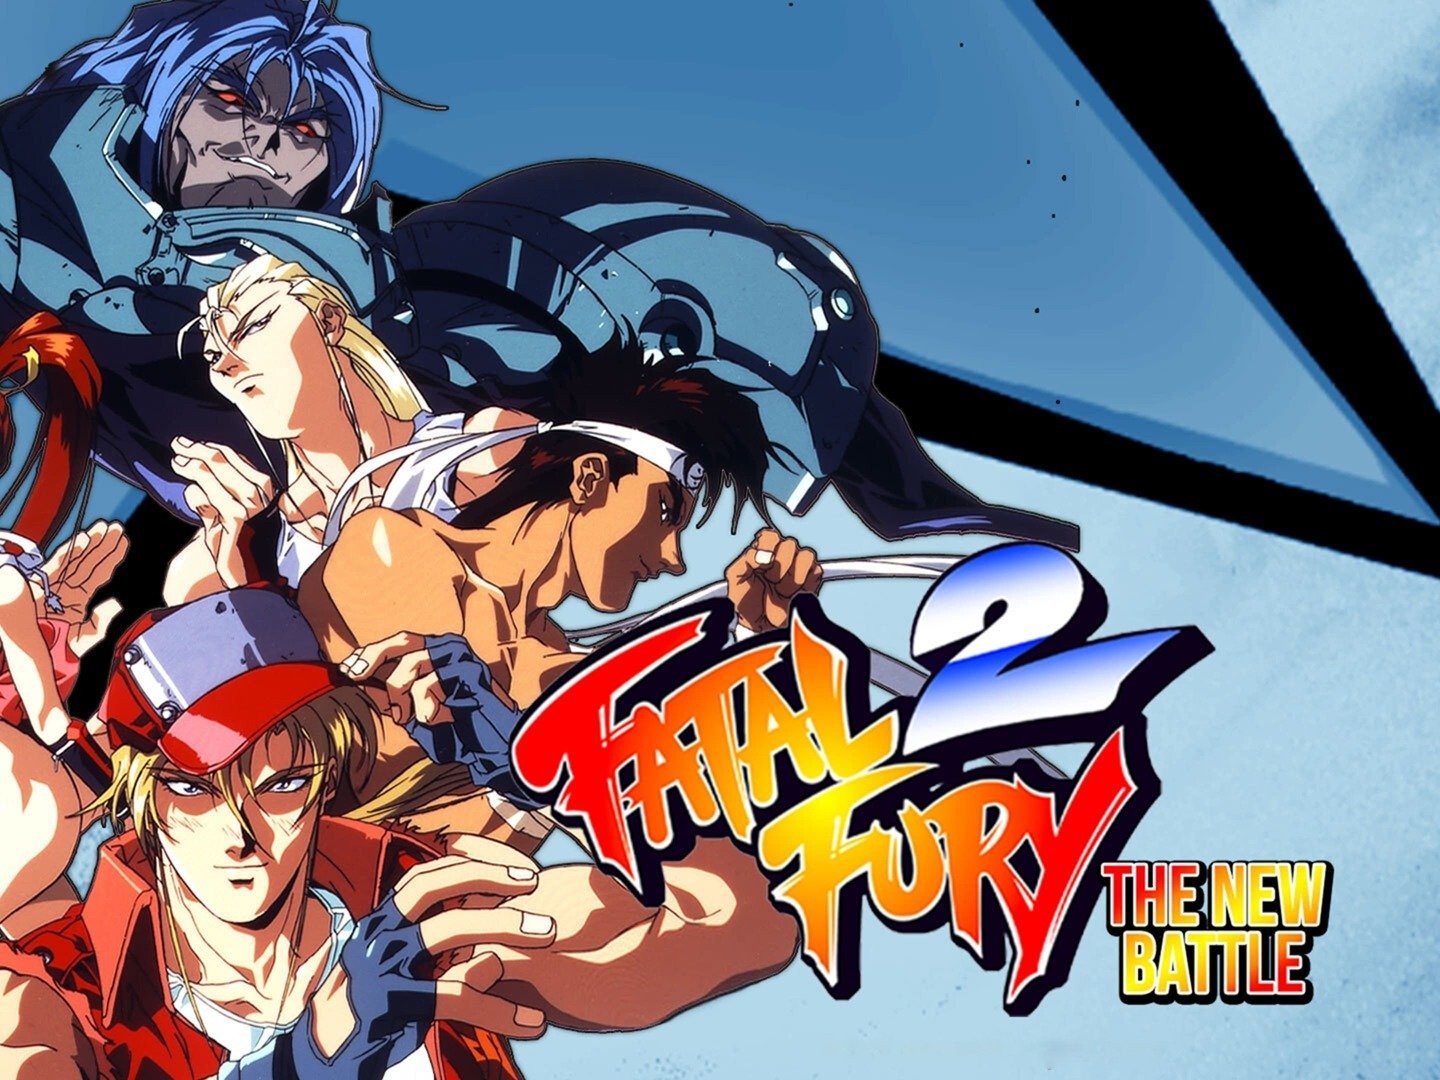 Fatal Fury 2: The New Battle - Rotten Tomatoes